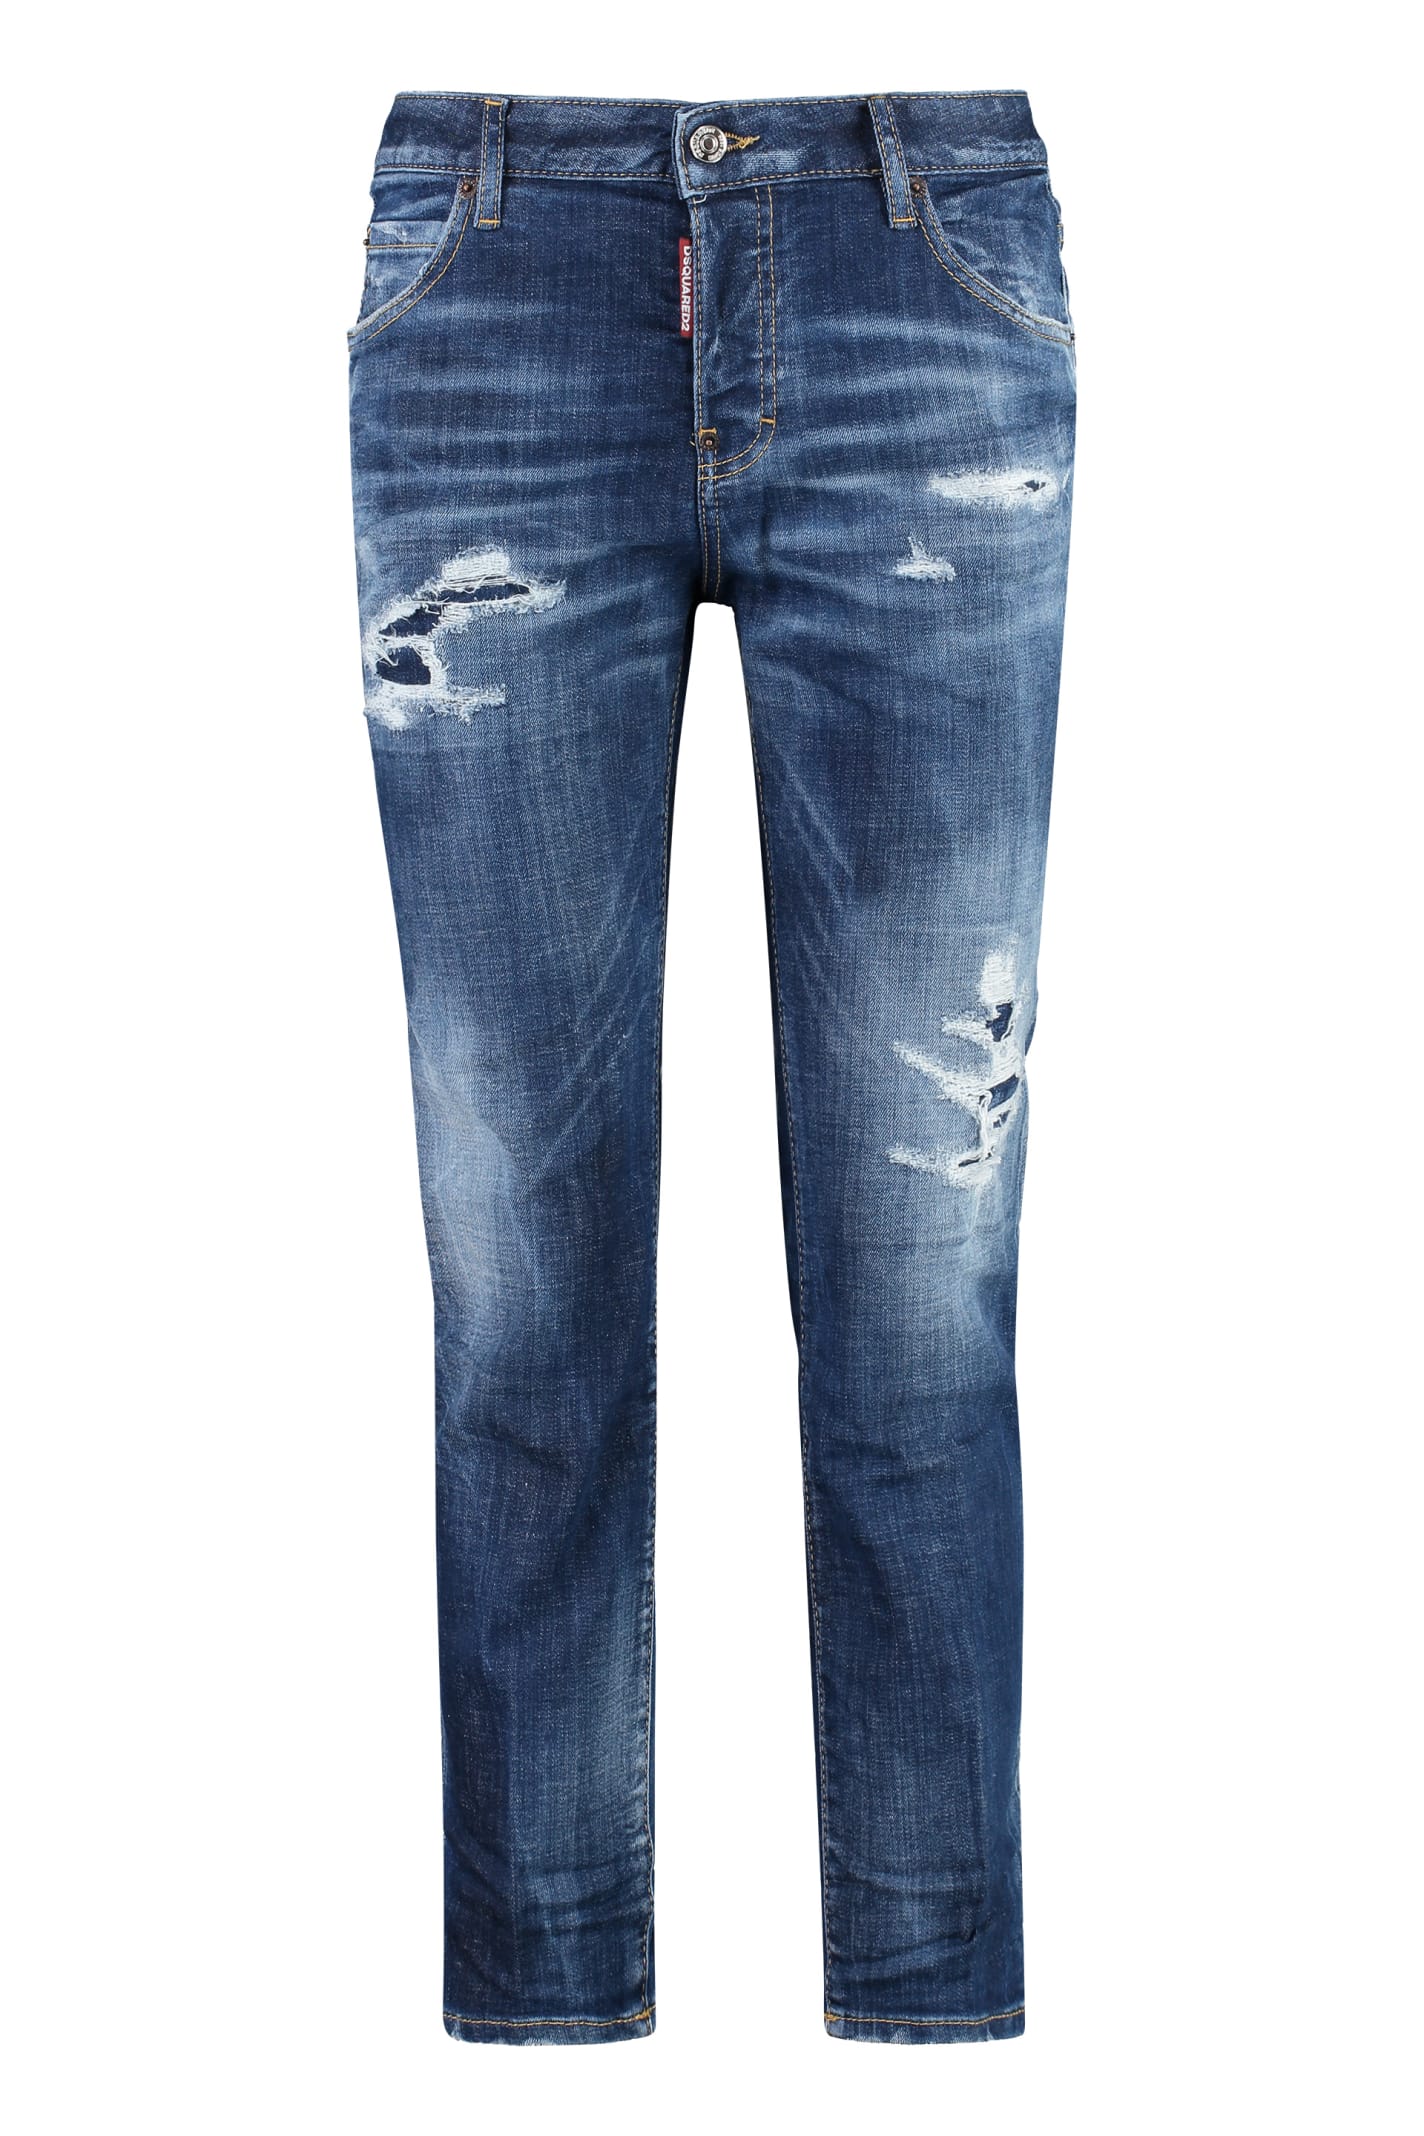 Dsquared2 Cool Girl Straight Leg Jeans In Navy Blue